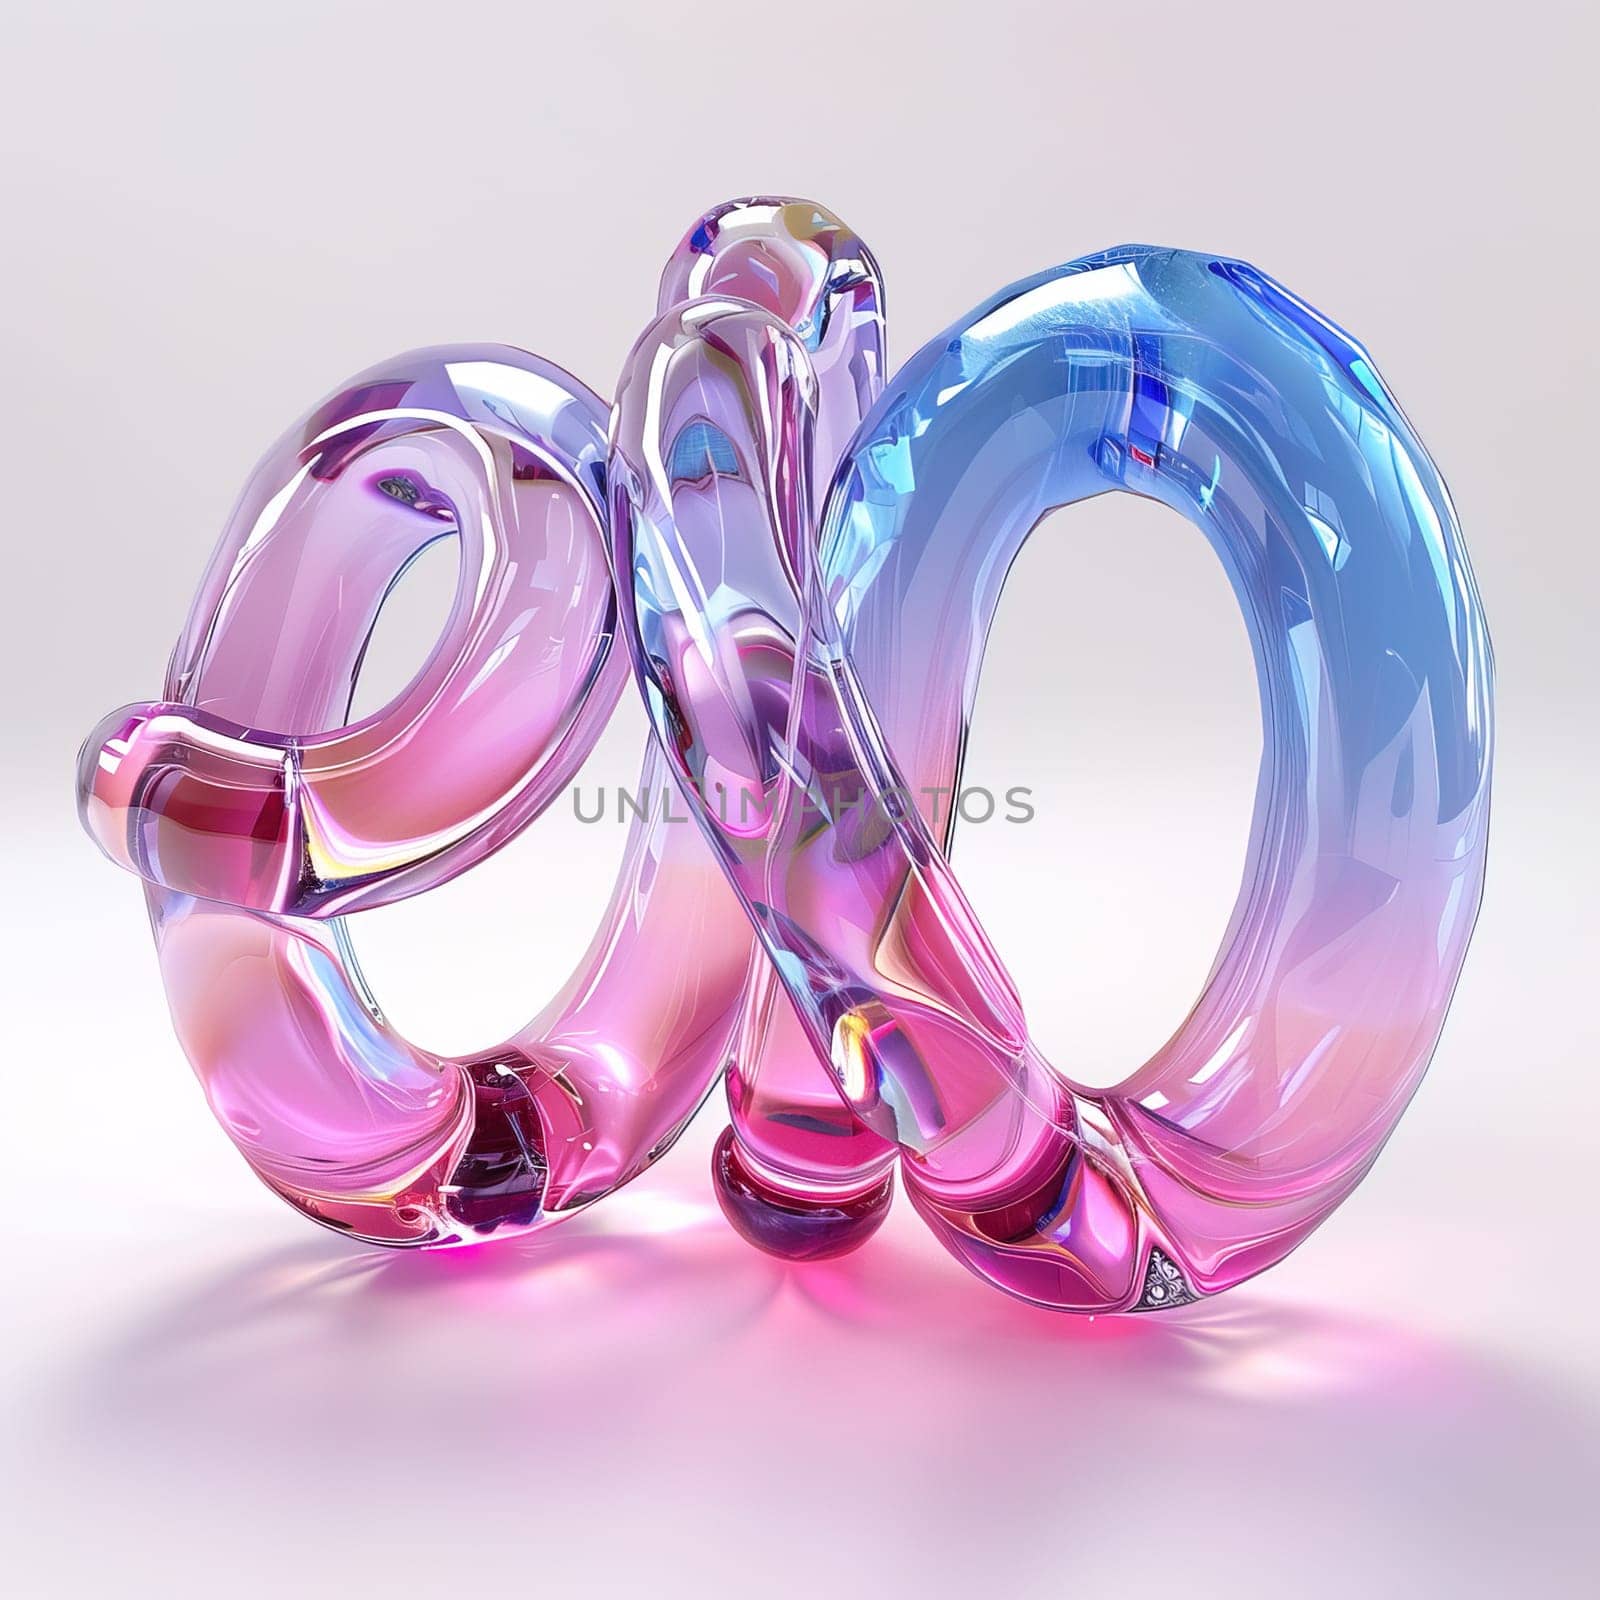 glassy pink and blue abstract figure for logo in the style of neumorphism, soft natural lighting simple and elegant space, close-up, super high detaill by mr-tigga